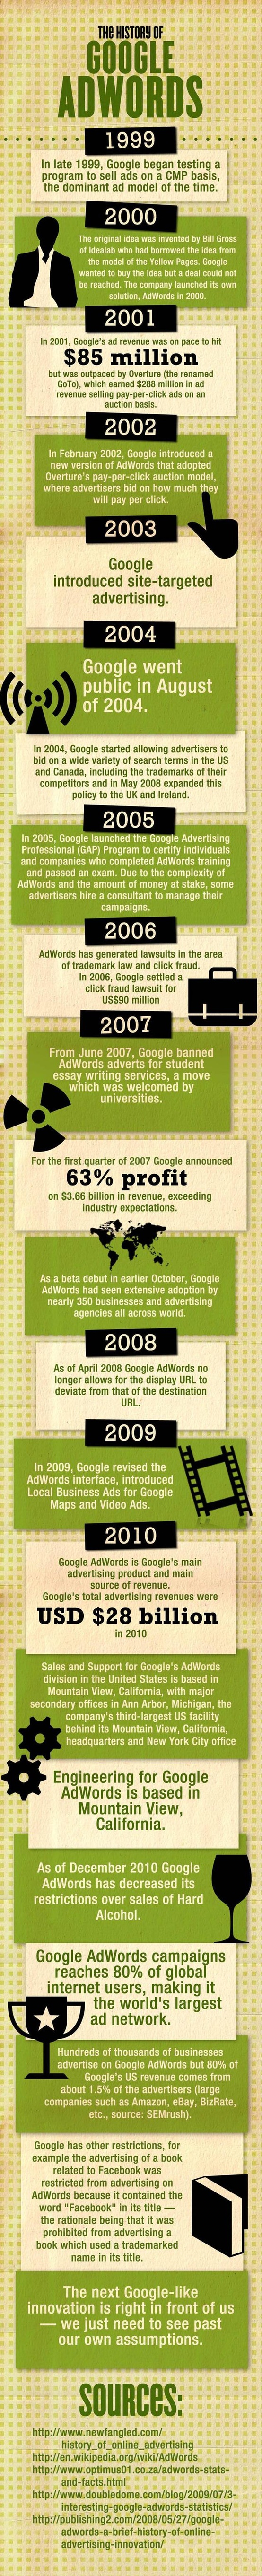 The History of Google Adwords